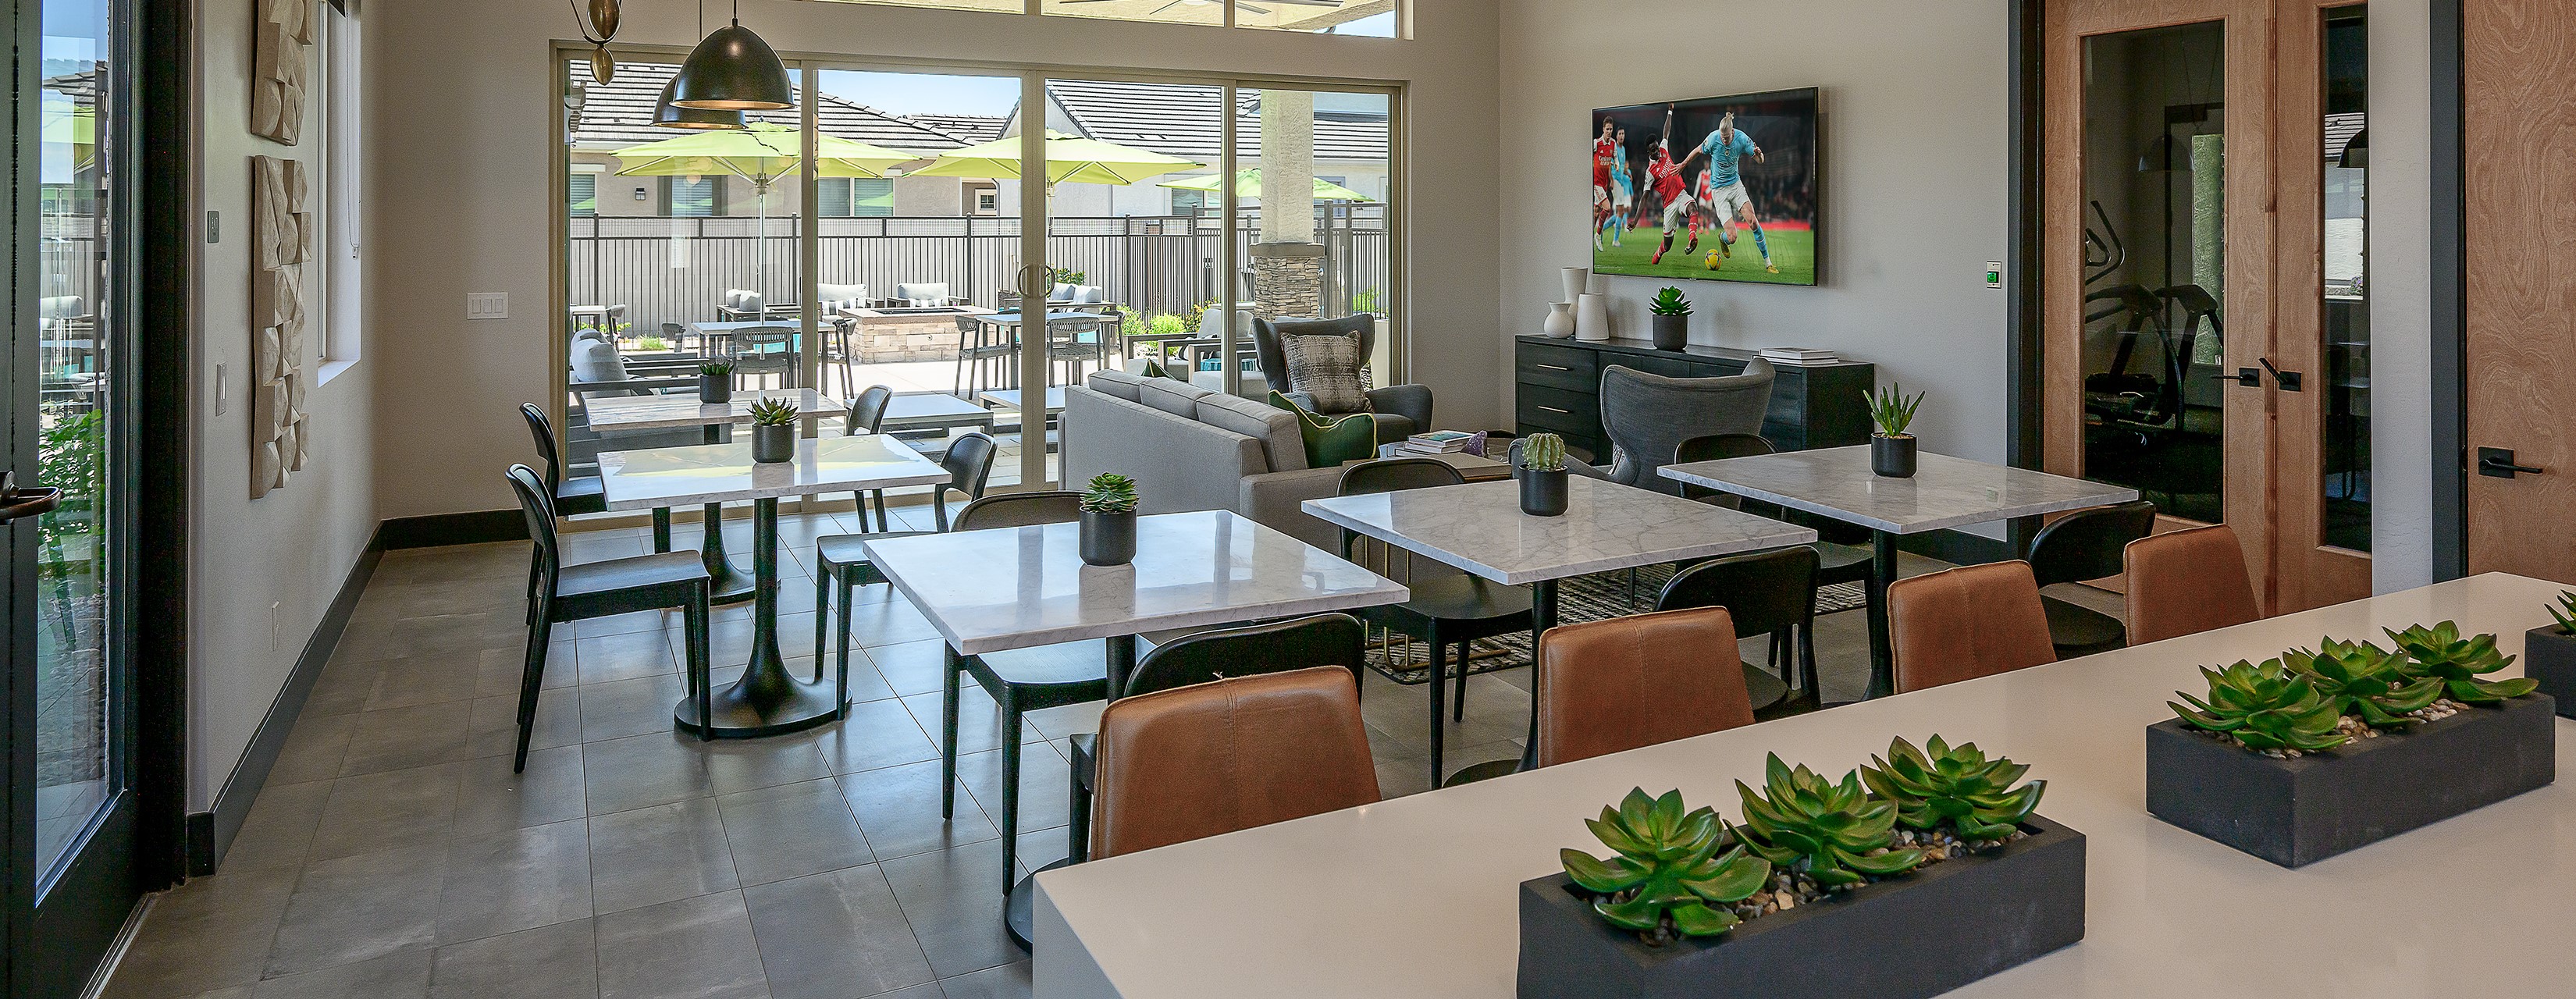 Resident Clubhouse Lounge & Shared Dining Area